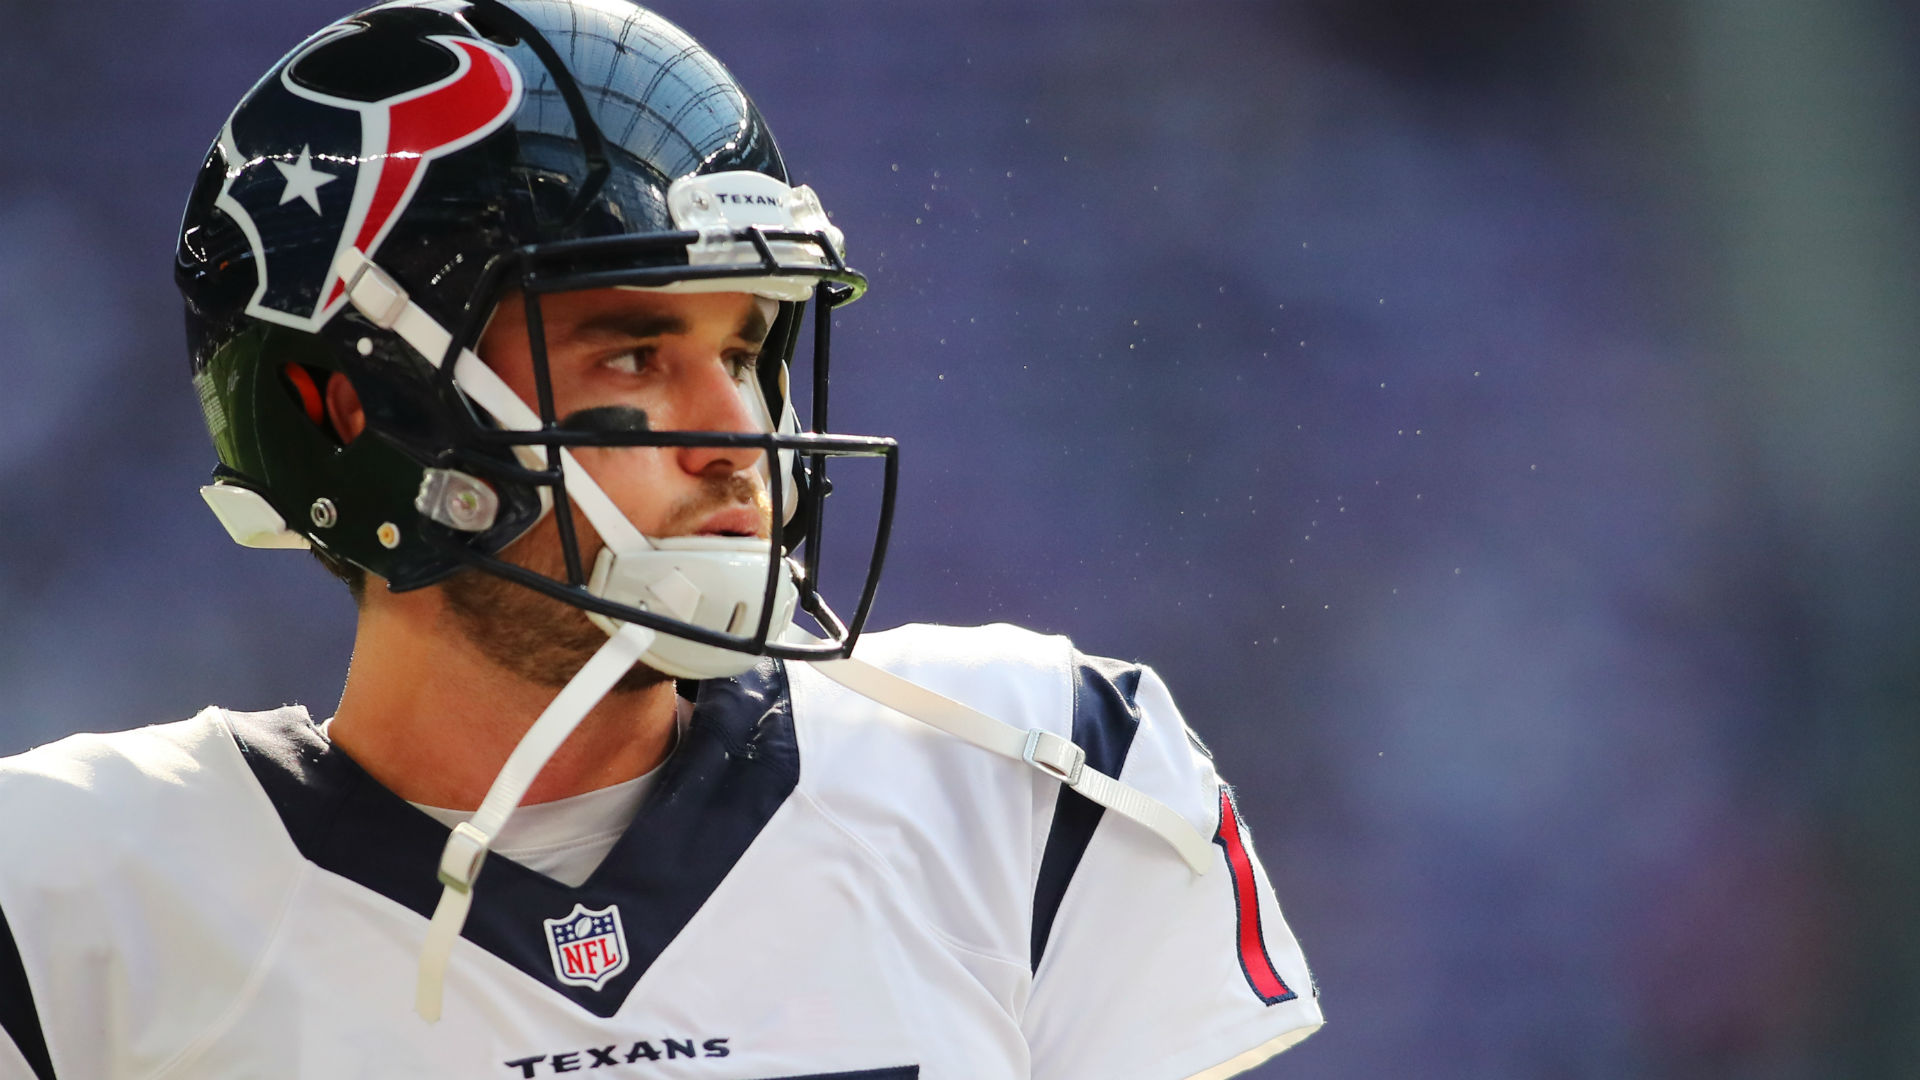 Texans won't bench Brock Osweiler, but maybe this GoFundMe can help